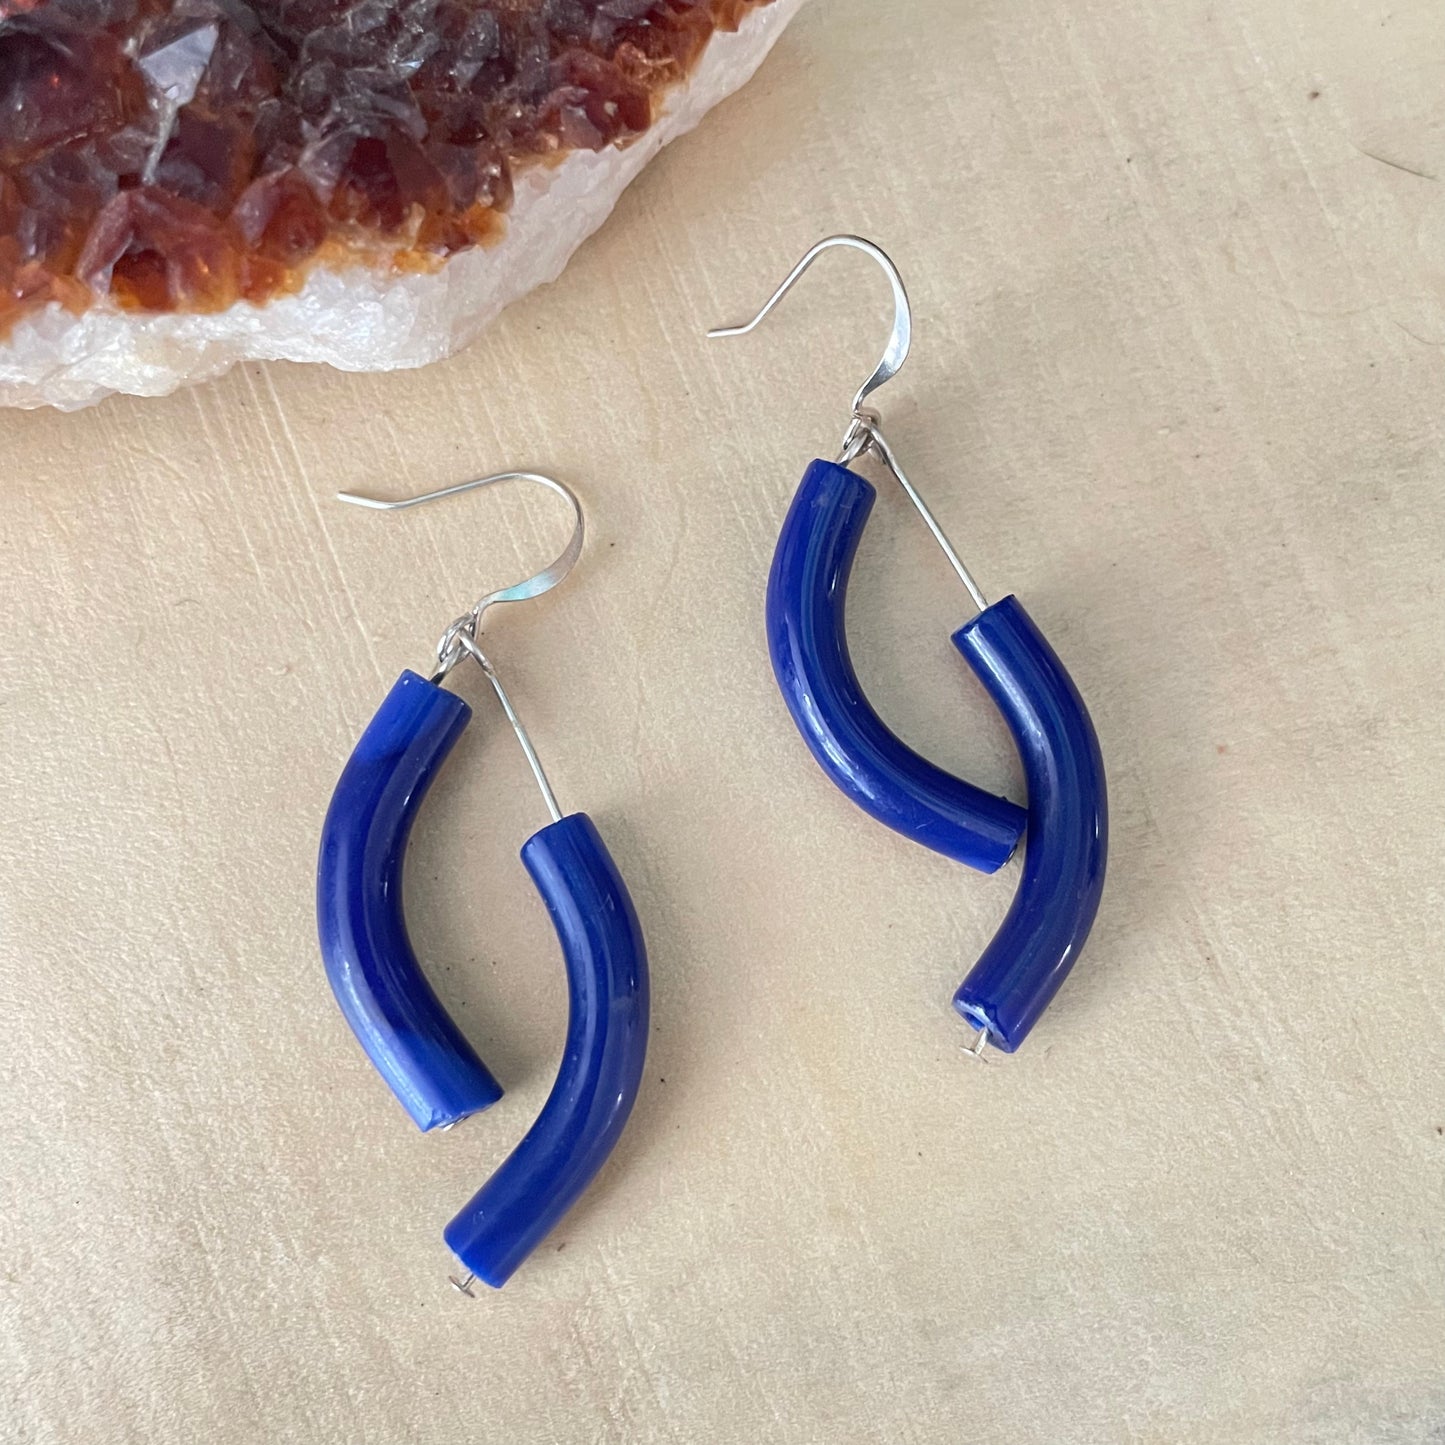 Dangling Dark Blue Curved Glass Earrings 2" Colorful Bold Versatile Daily Wear